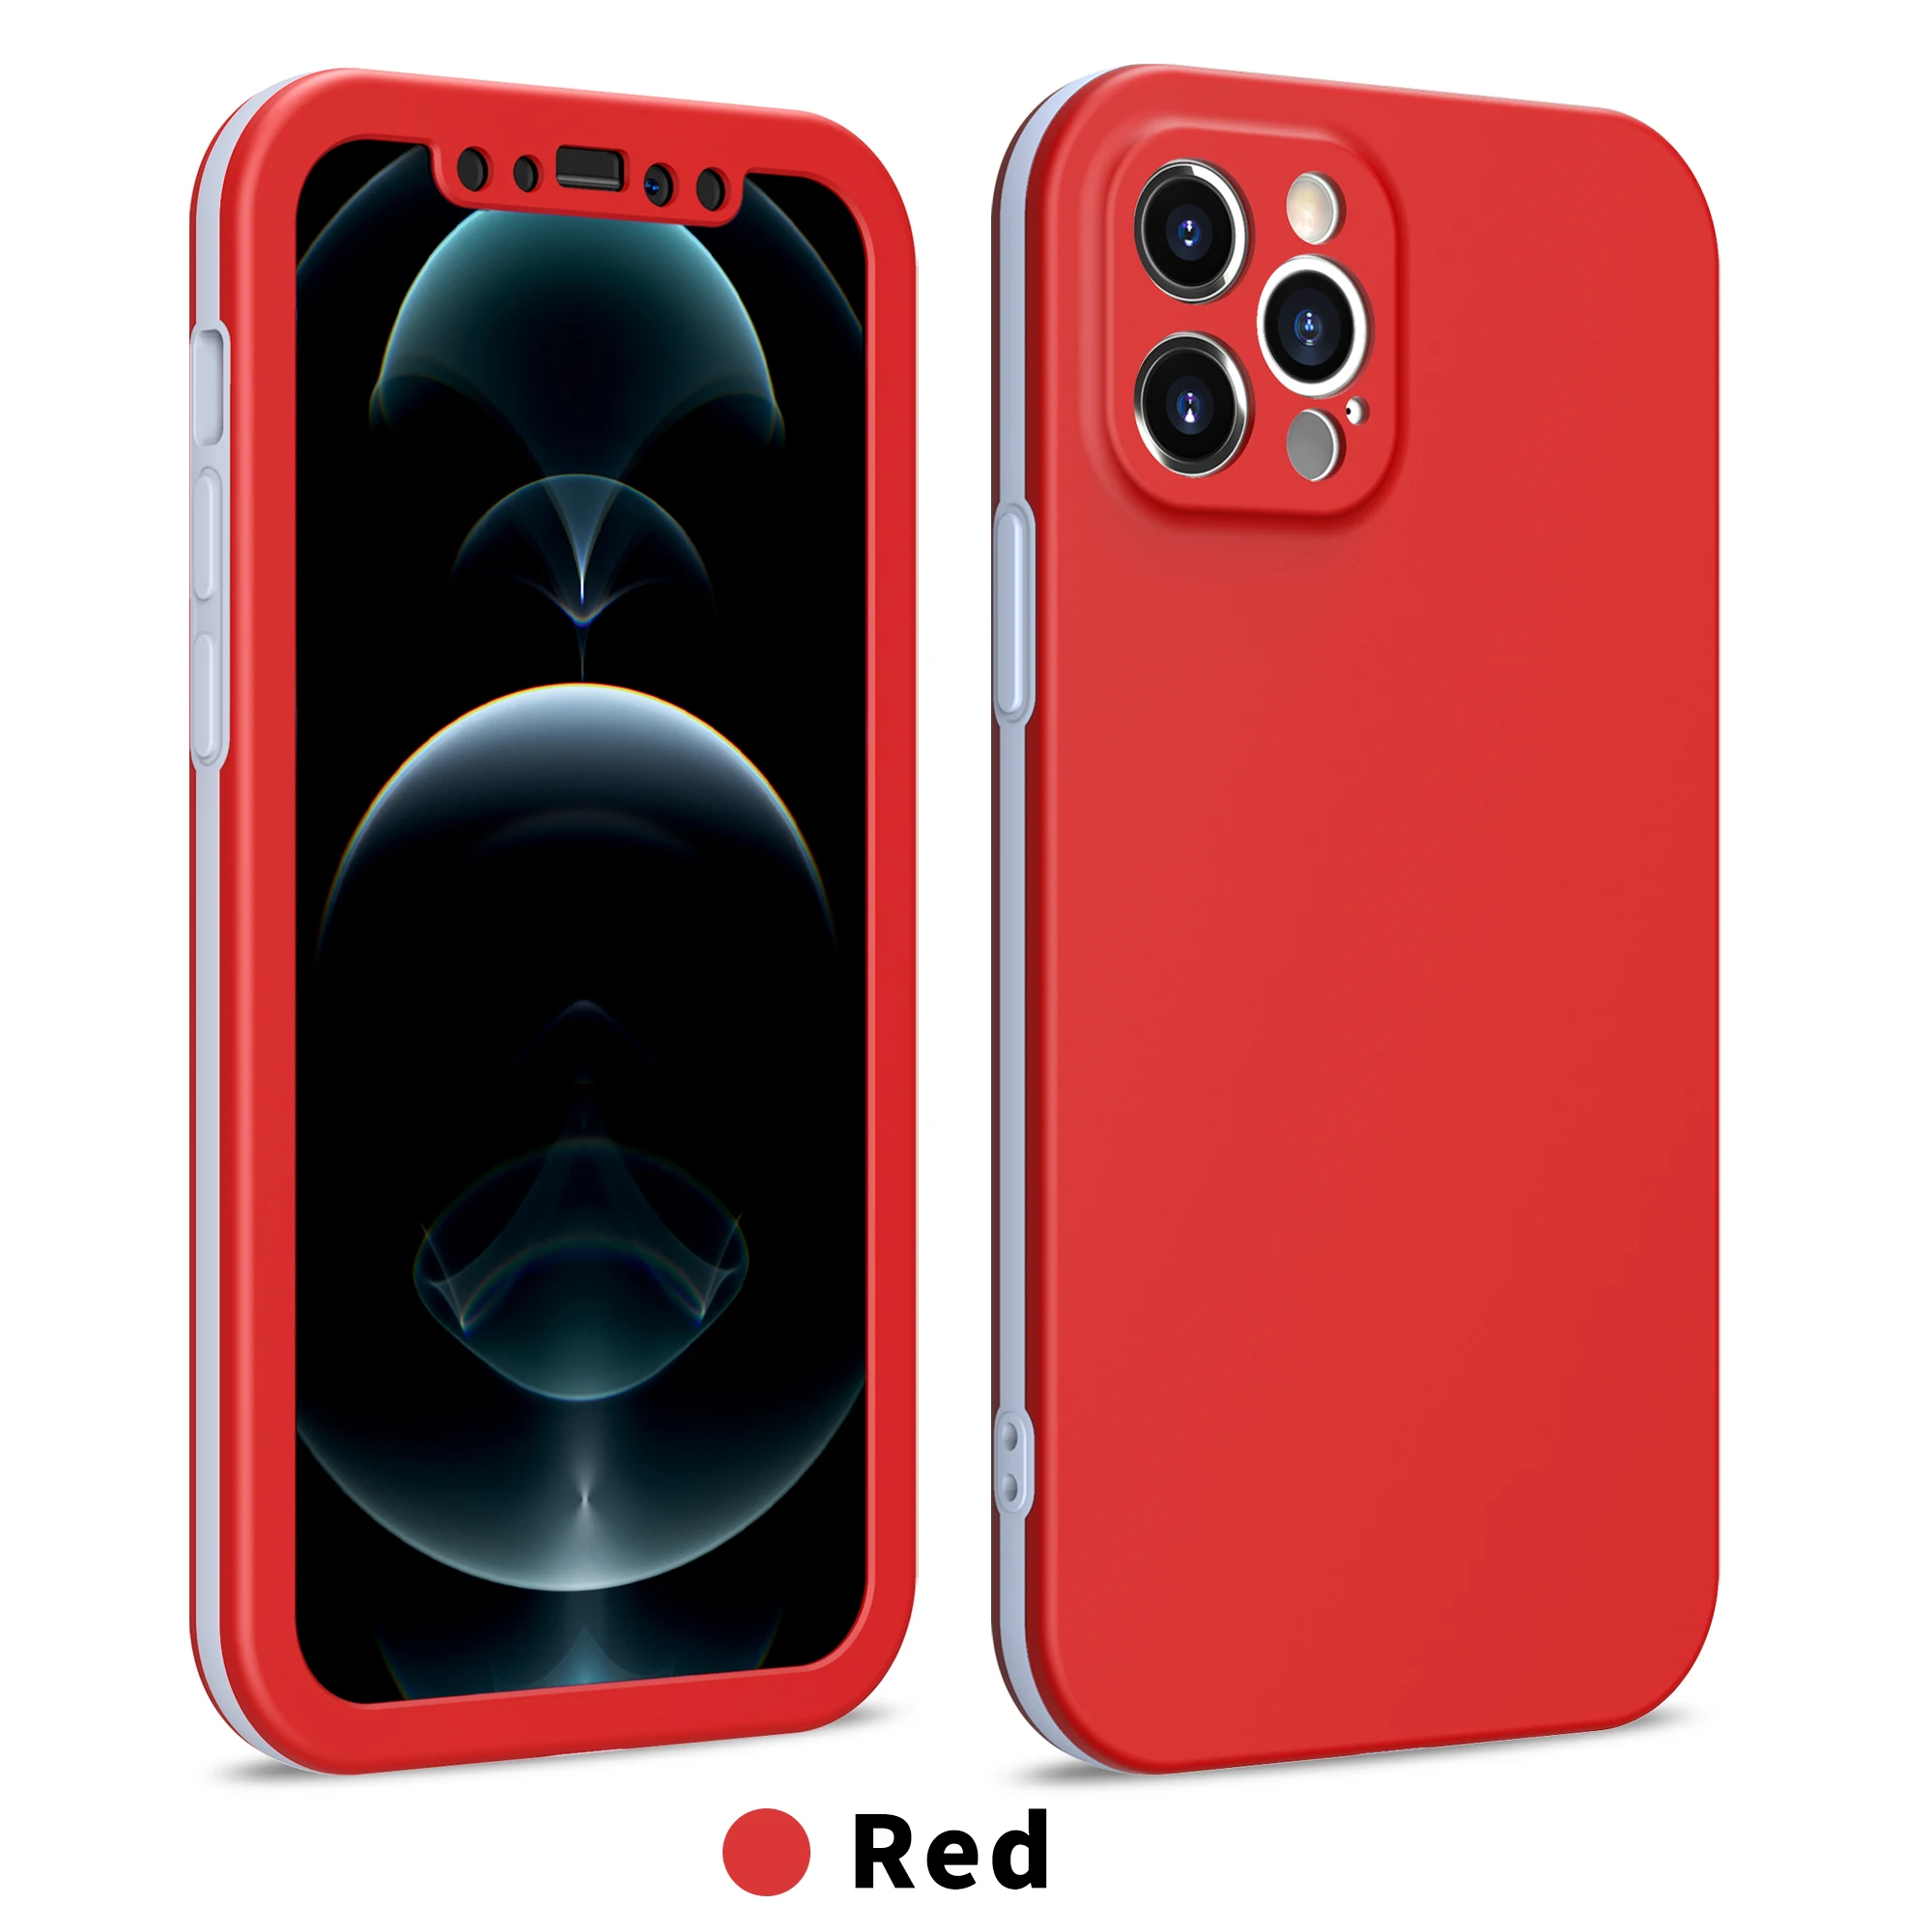 360 Full Cover Protective Phone Case For iPhone 13 12 Mini 11 Pro XS Max X XR 6 7 8 Plus SE 2020 Soft Silicone Shockproof Cover iphone xr clear case